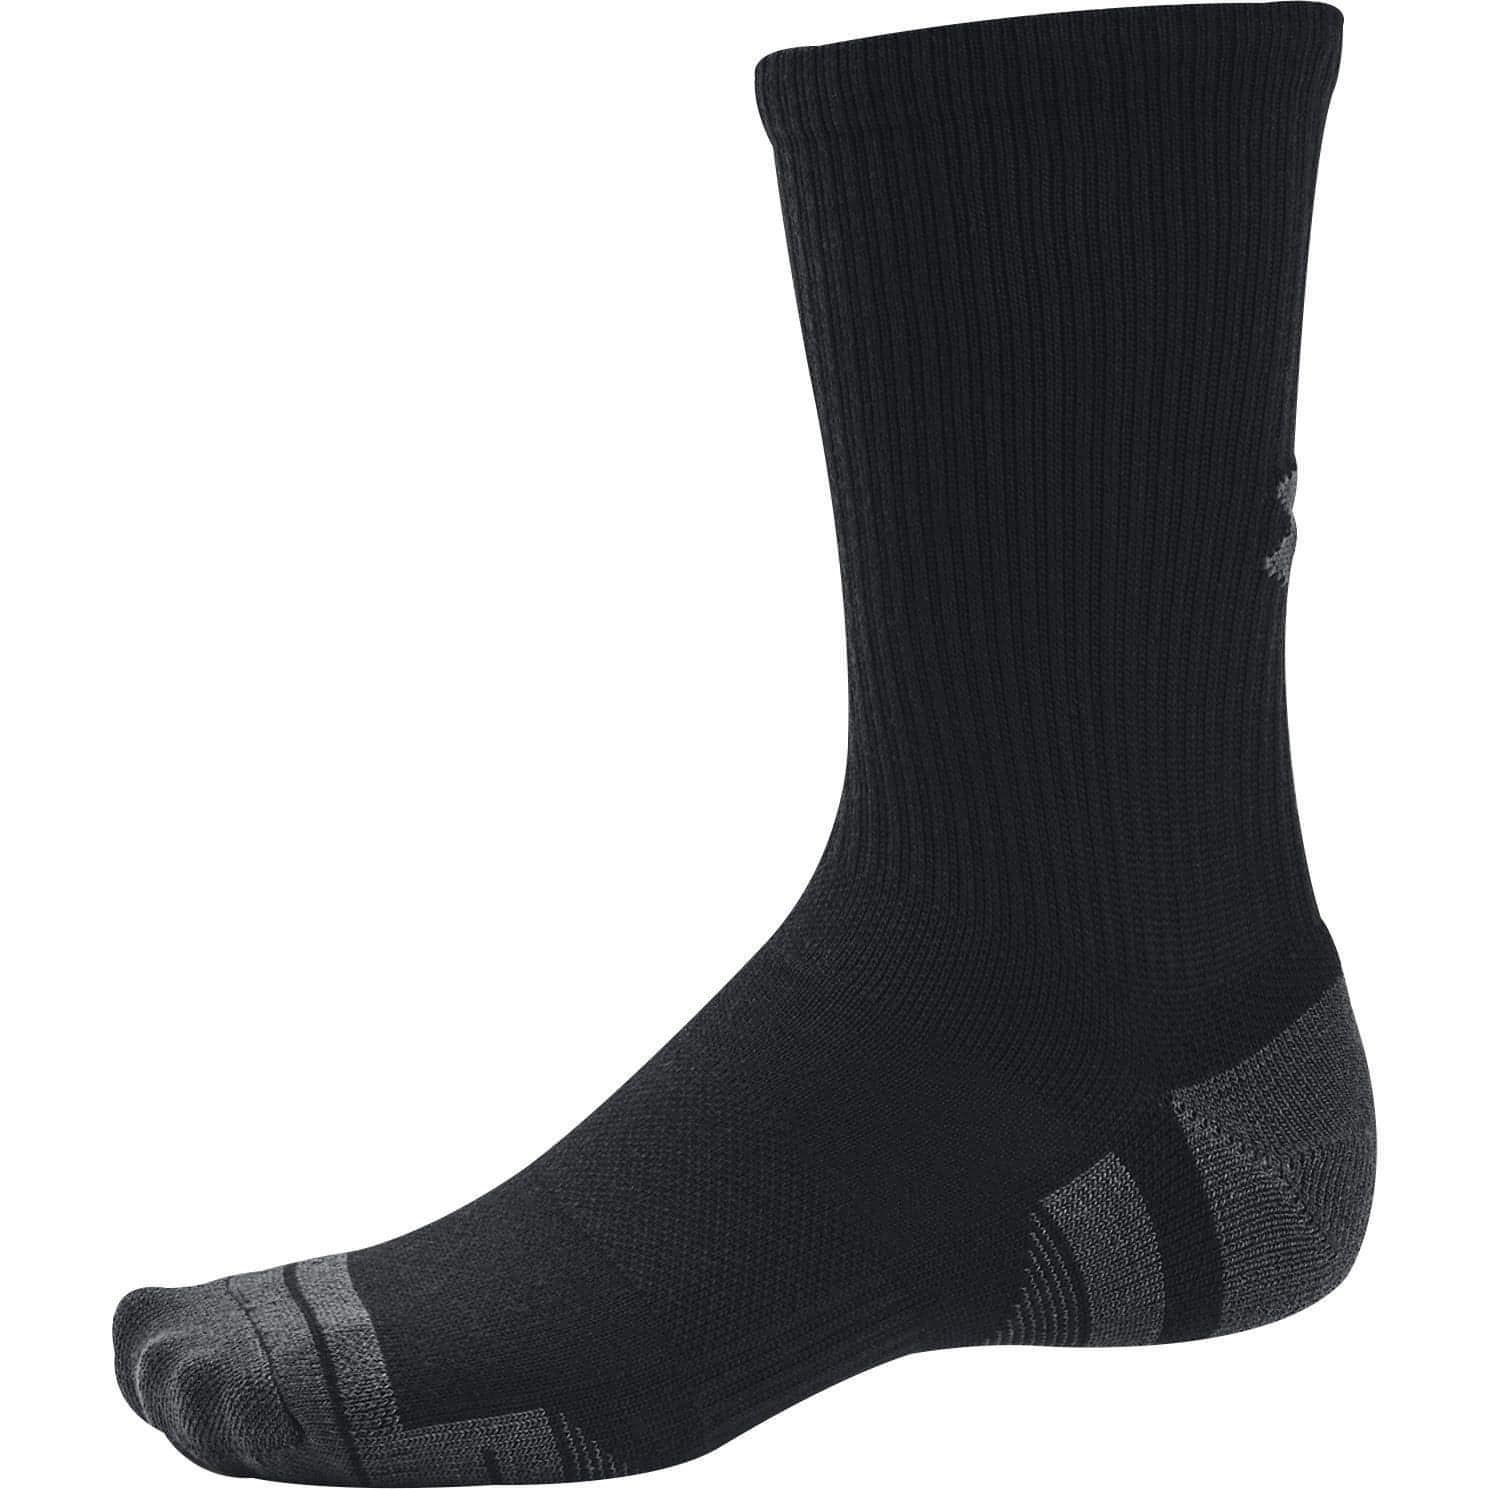 Under Armour Performance Tech Pack Crew Socks Side - Side View